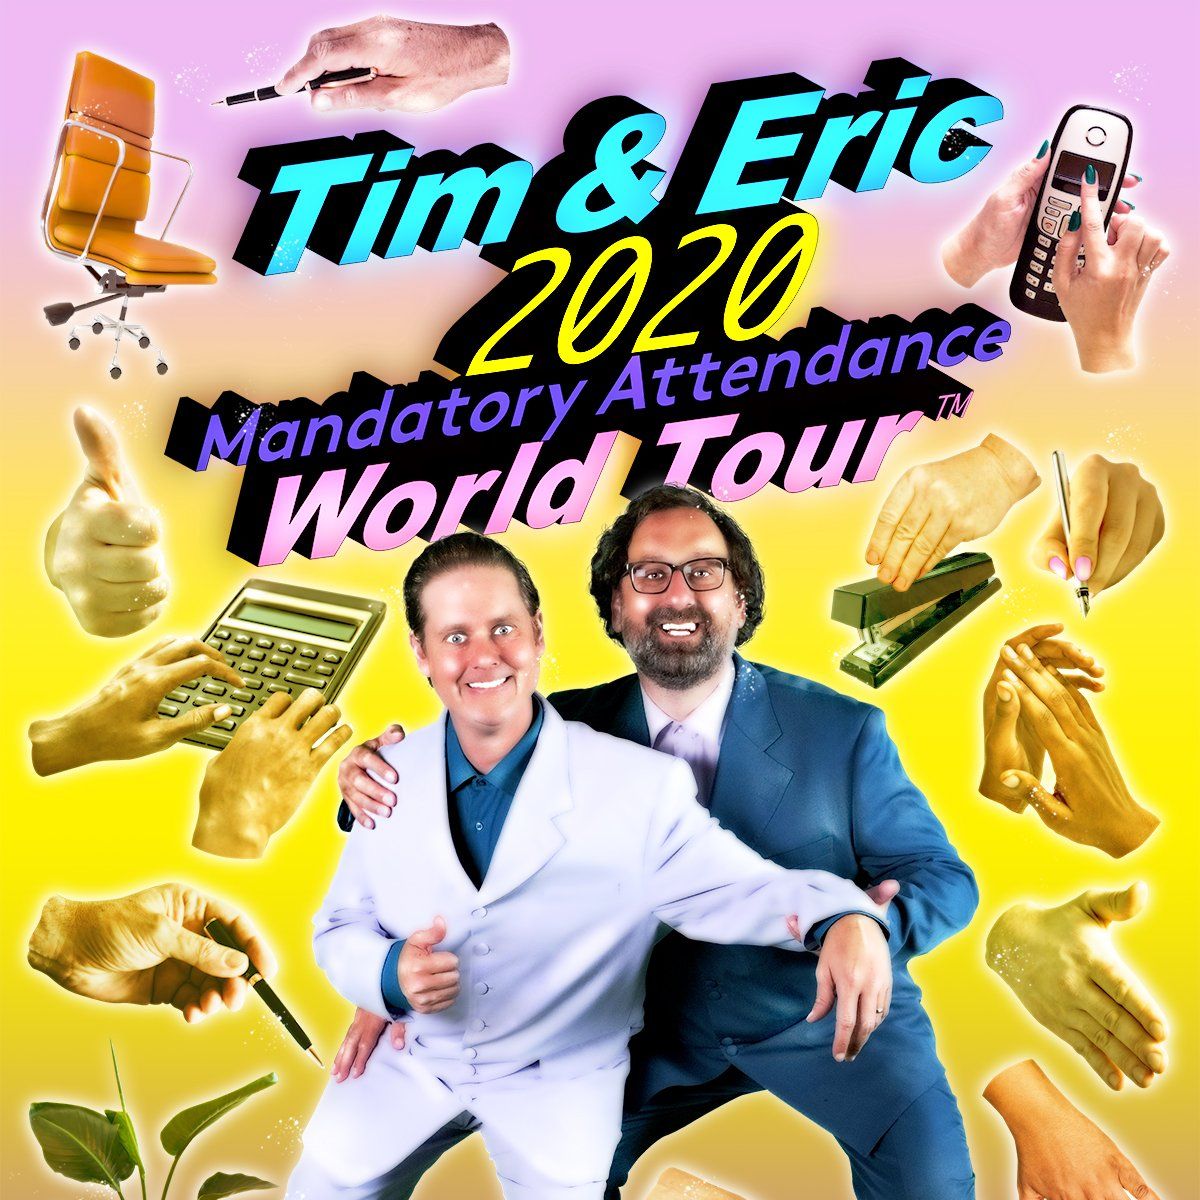 Theatre at Ace Hotel on X: TONIGHT @aegpresents Tim and Eric